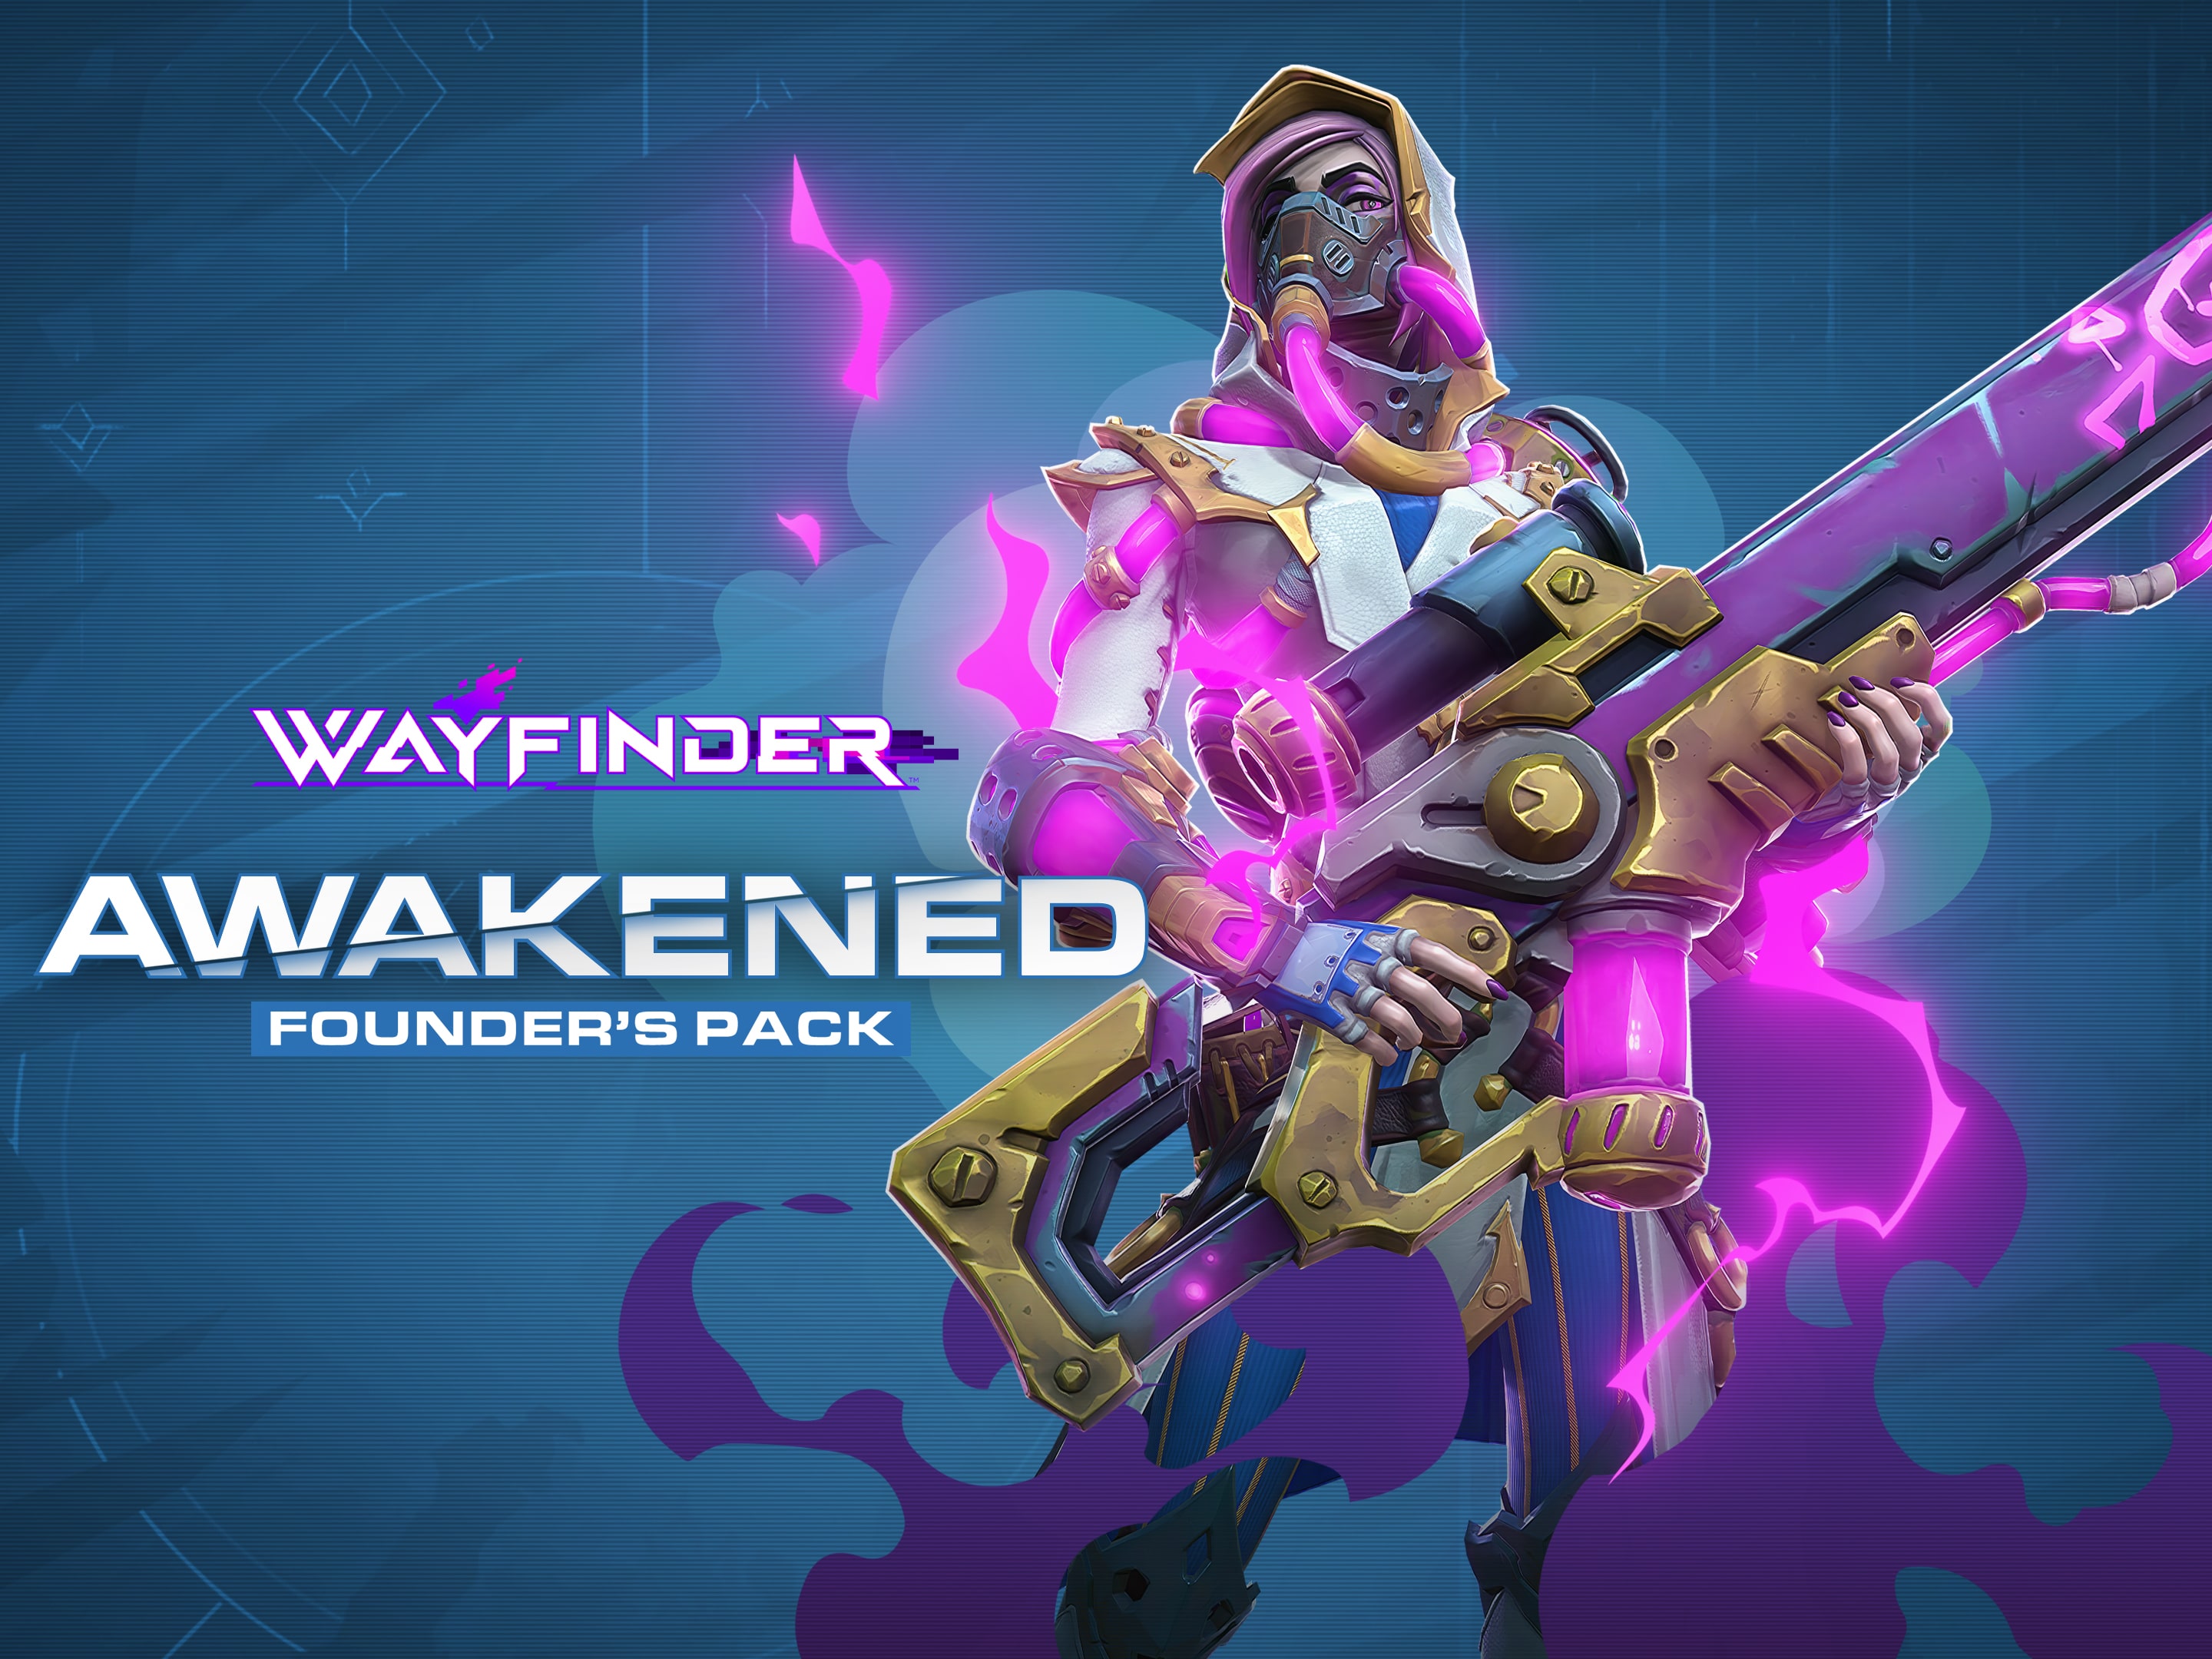 Wayfinder: PS4 and PS5 players get exclusive Early Access to the